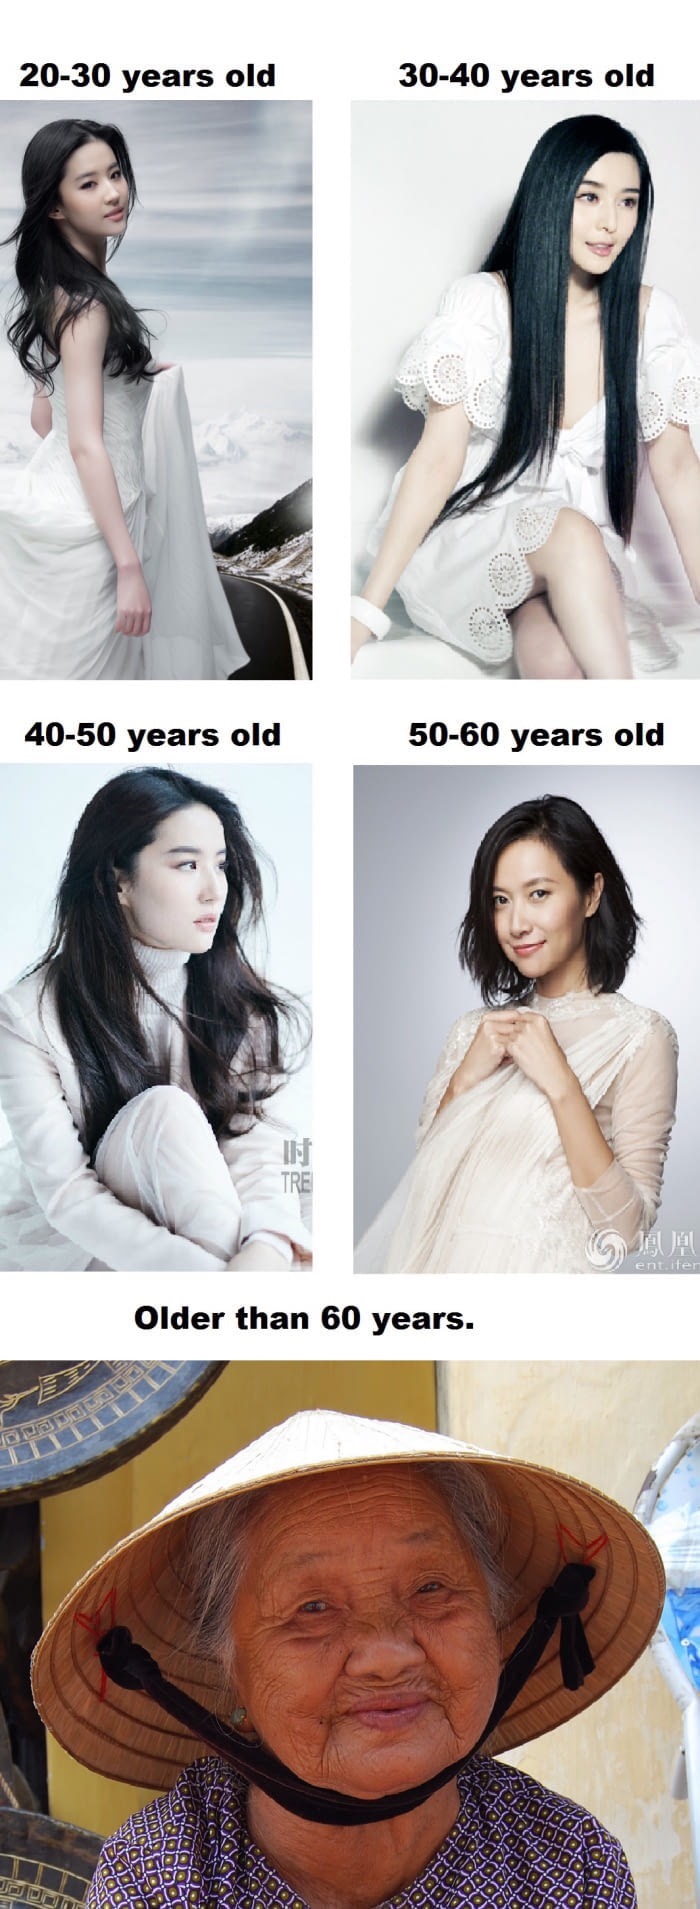 east asia chinese women meme - 2030 years old 3040 years old 4050 years old 5060 years old Gjumi entiter Older than 60 years.